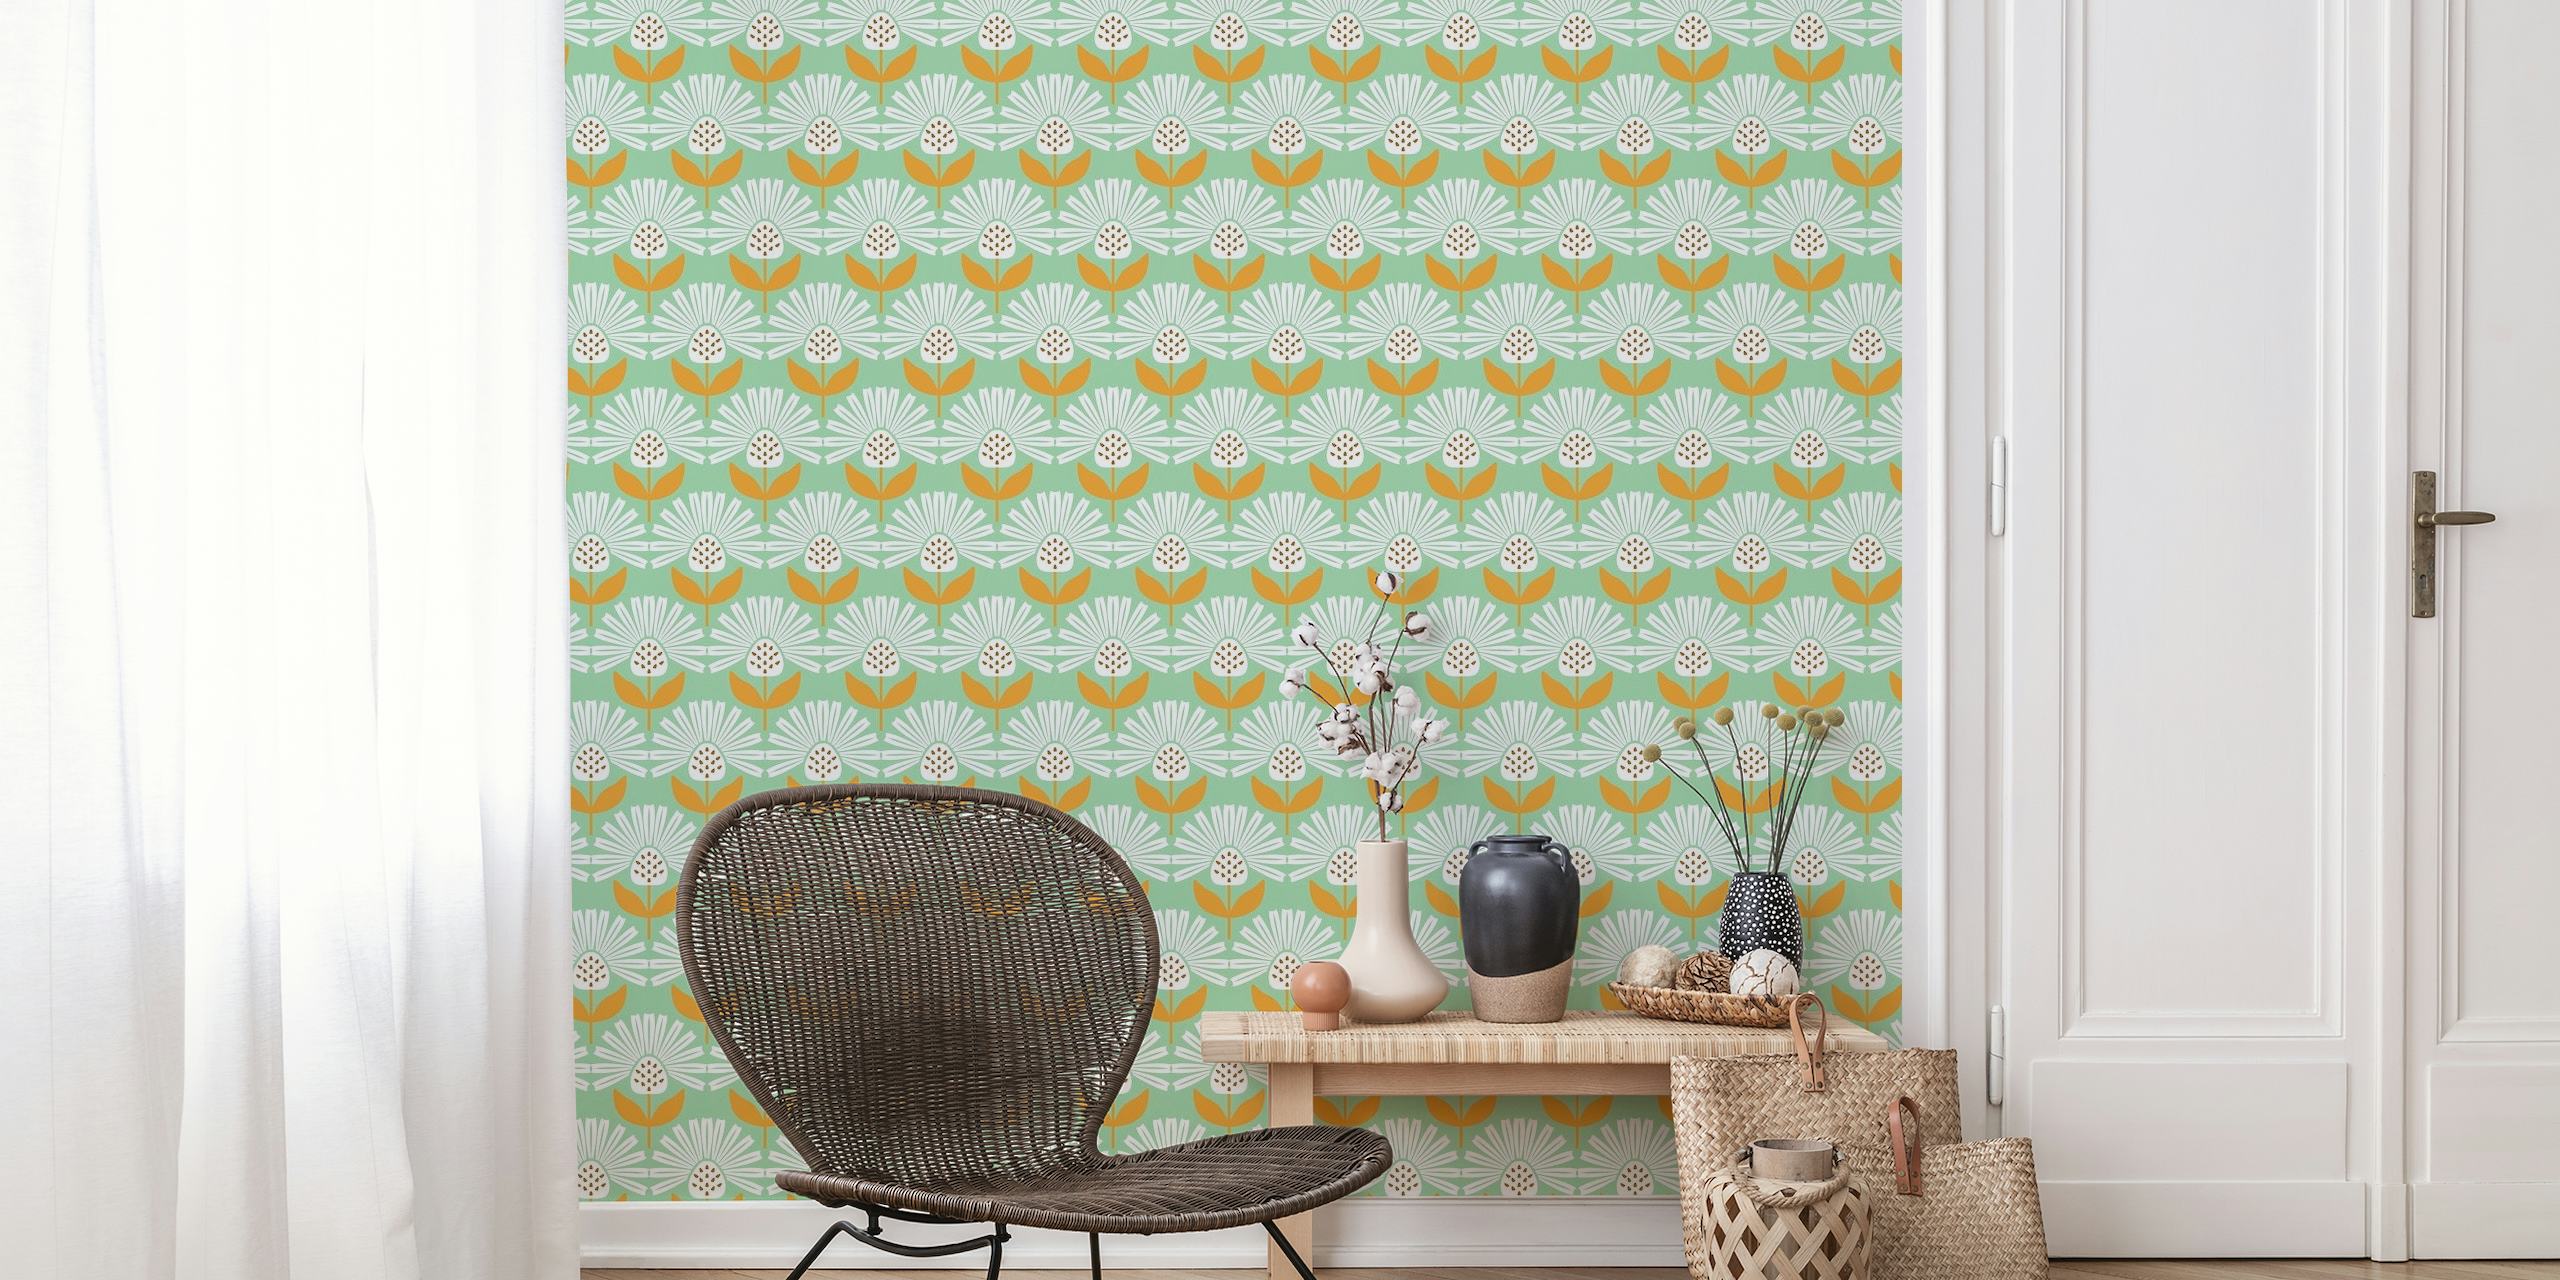 Mid century modern style floral pattern wall mural in teal and orange